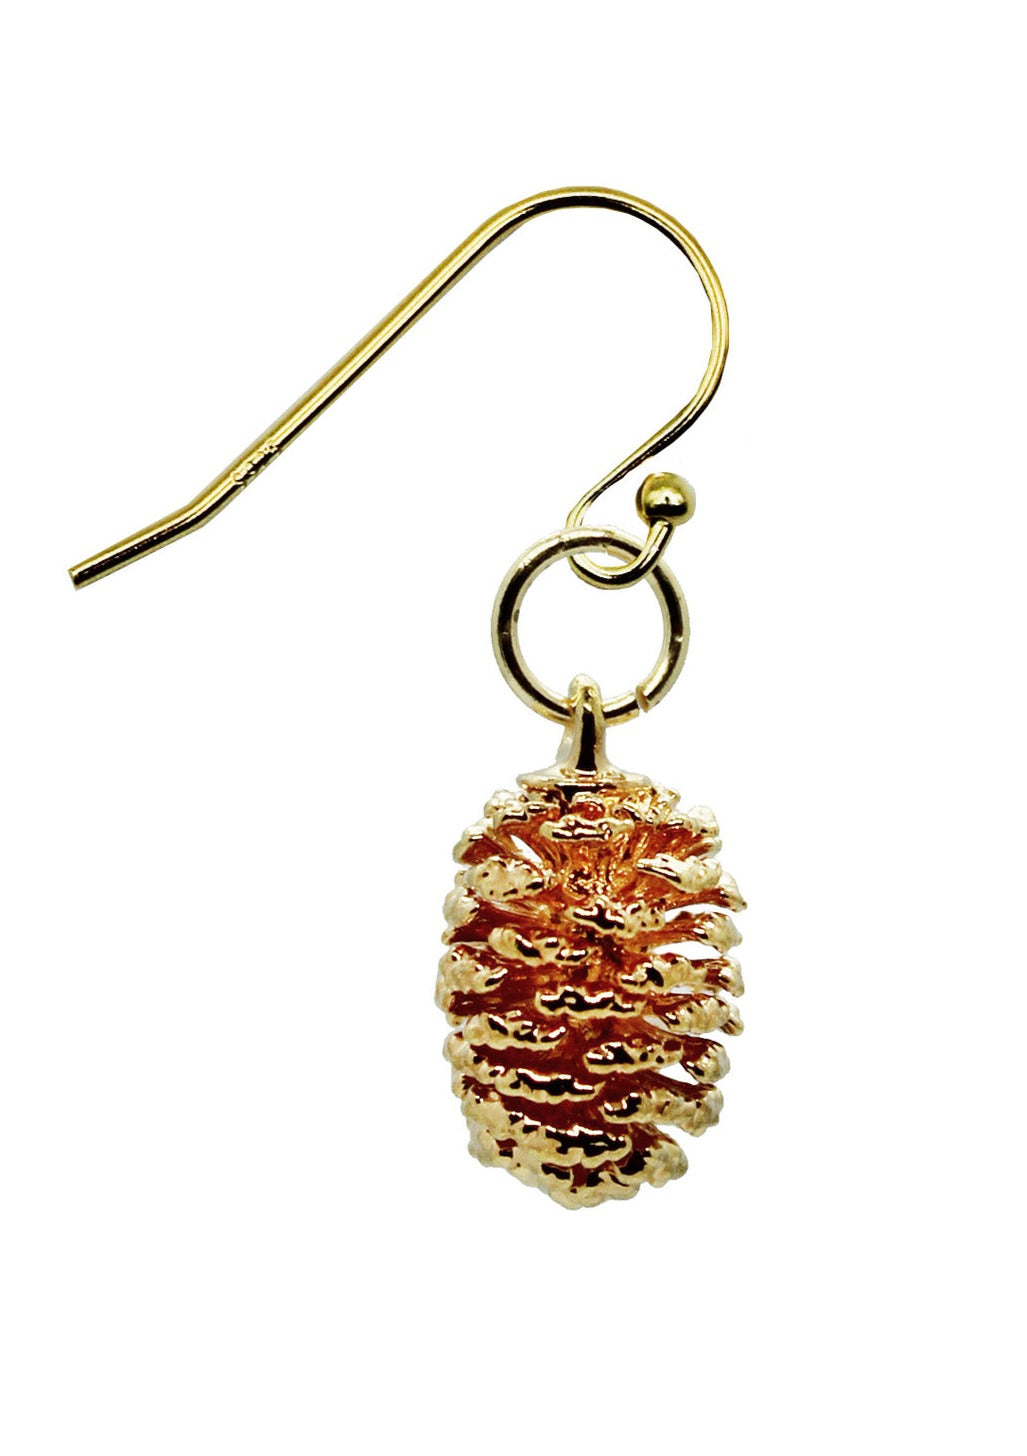 Real Miniature Acorn Electro-plated with 24 Karat Gold on a French Hook Earring